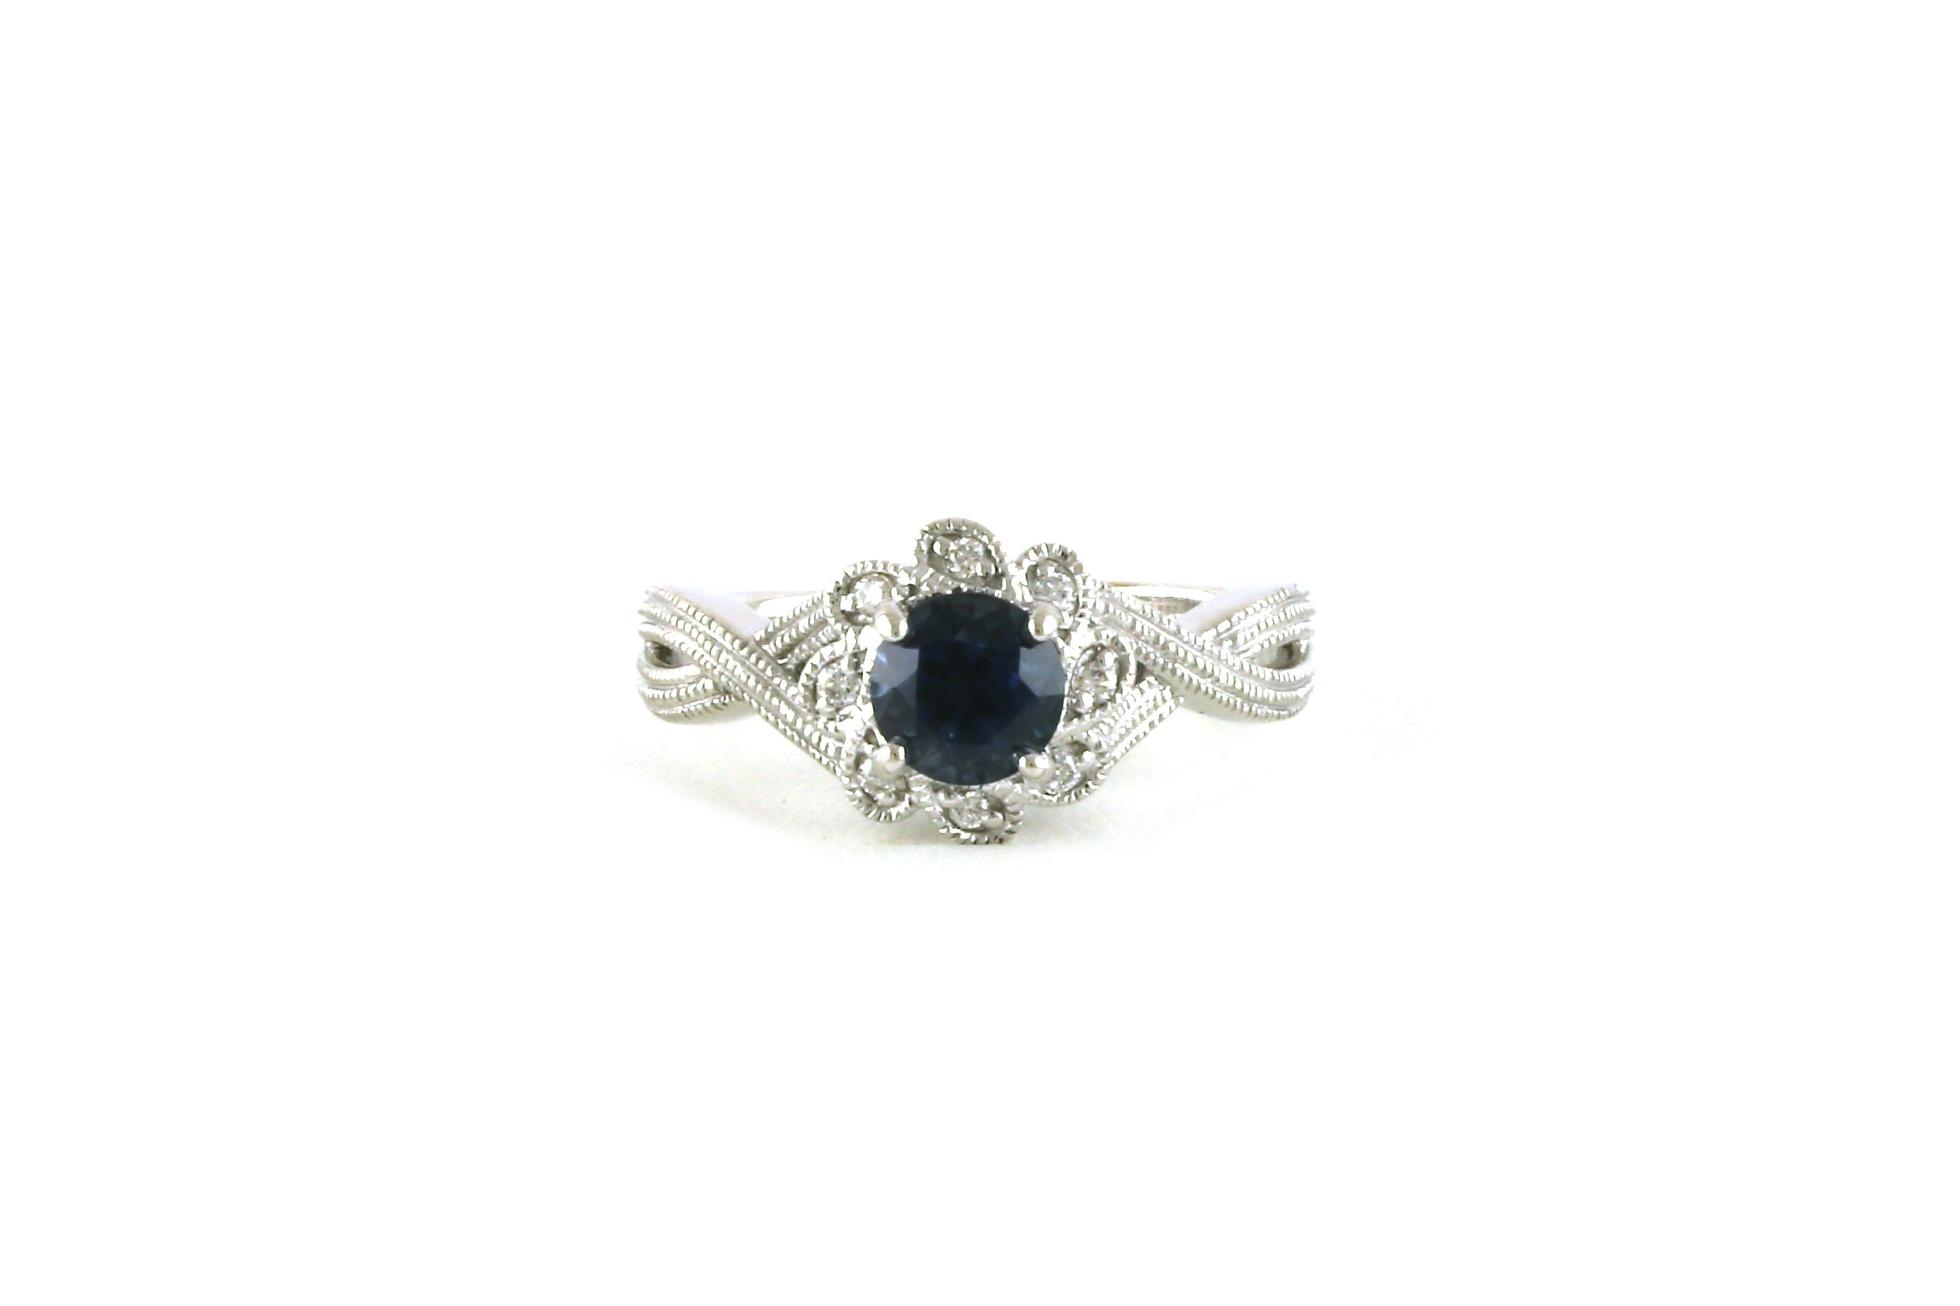 Flower Halo Ring with Montana Sapphire and Diamonds in White Gold